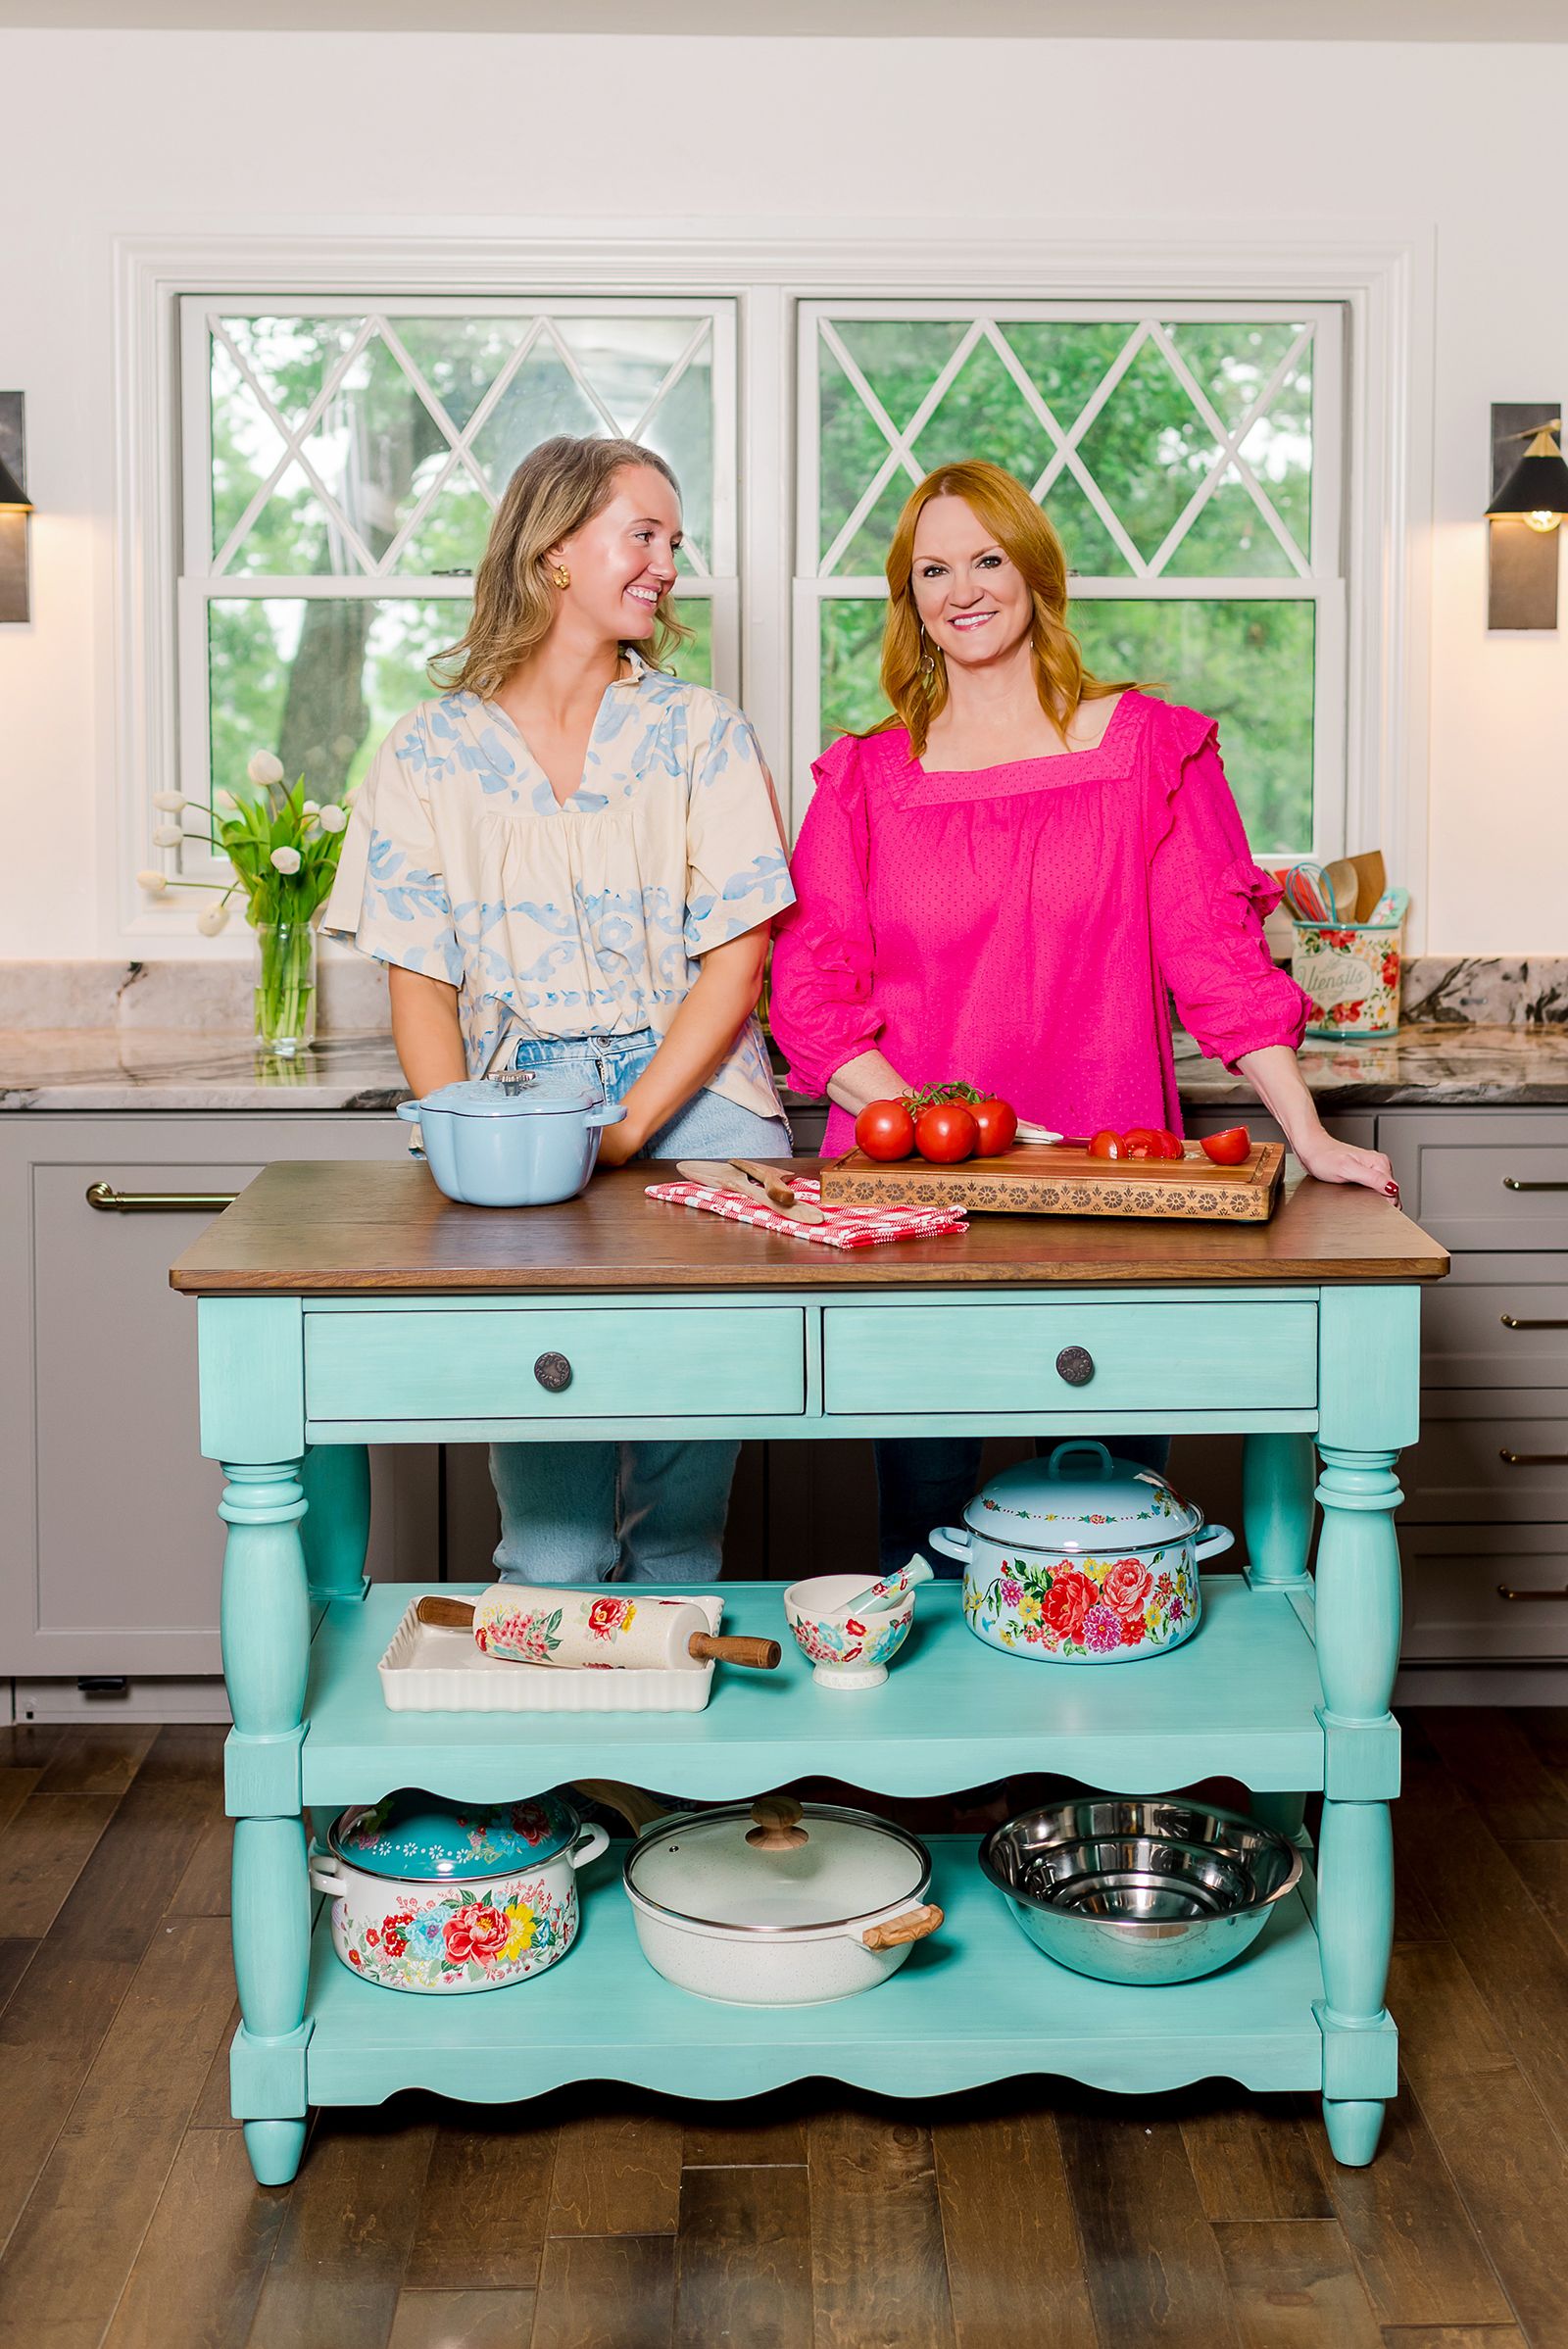 Ree Drummond The Pioneer Woman Fashion Line Walmart In-store Expansion